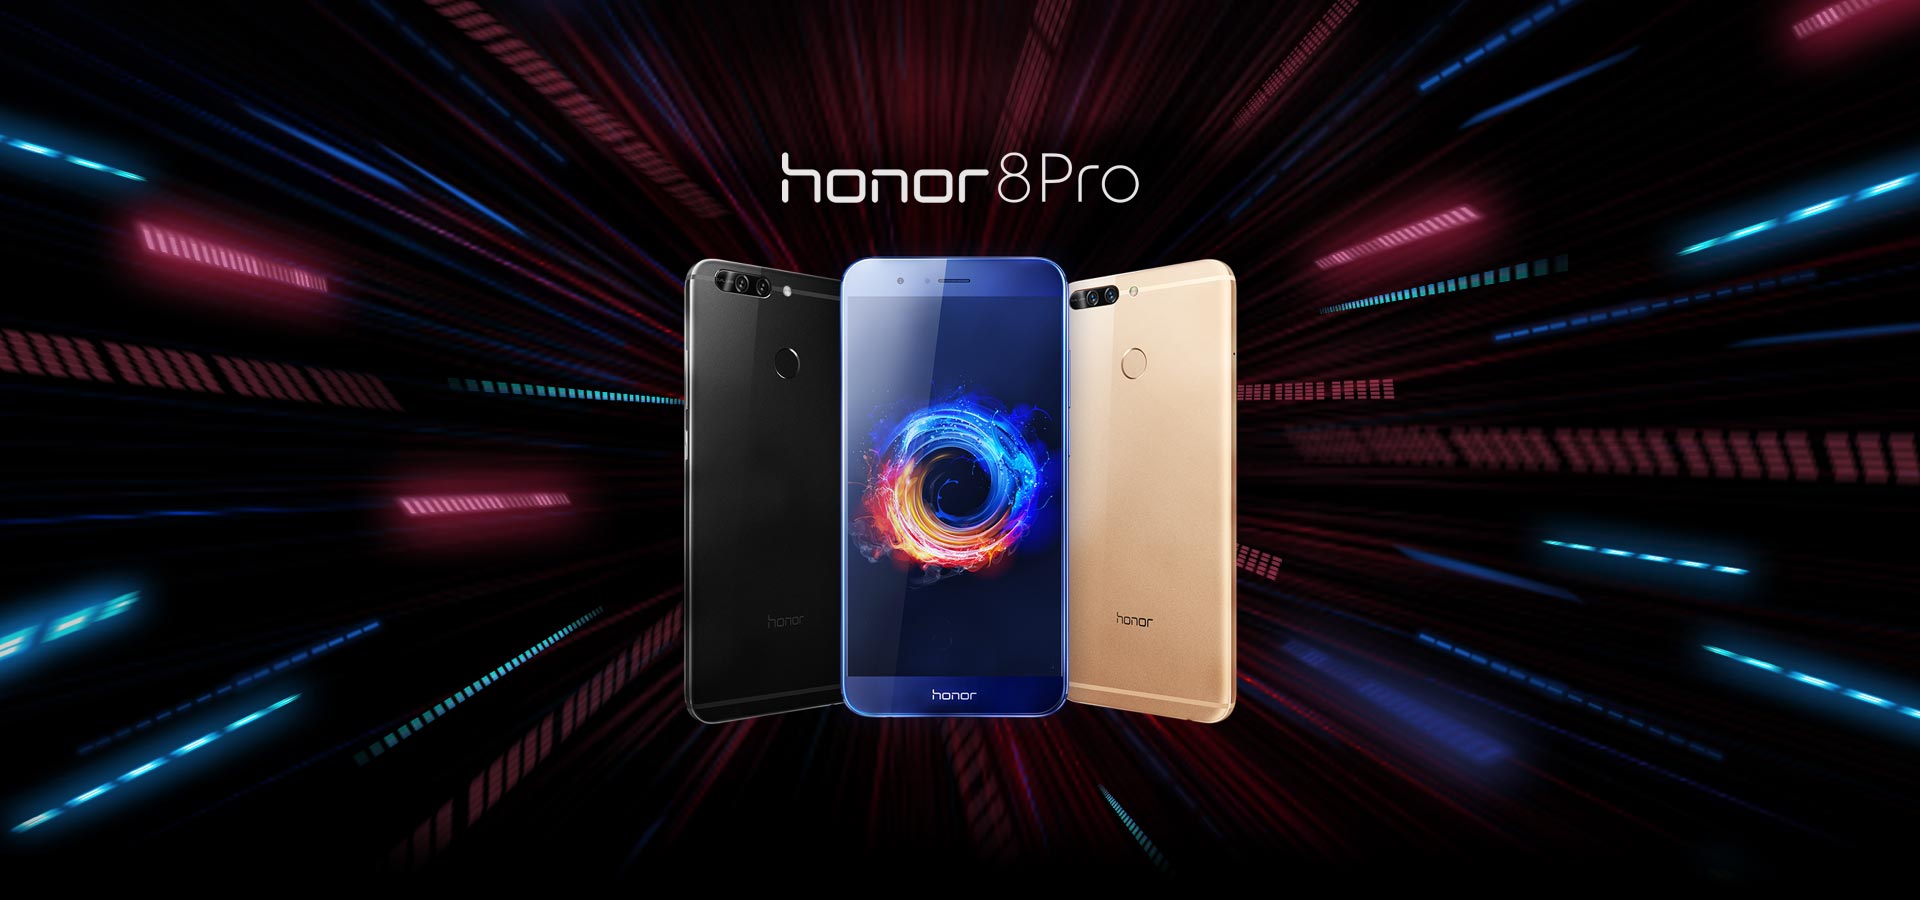 Honor 8 Pro Launched In India